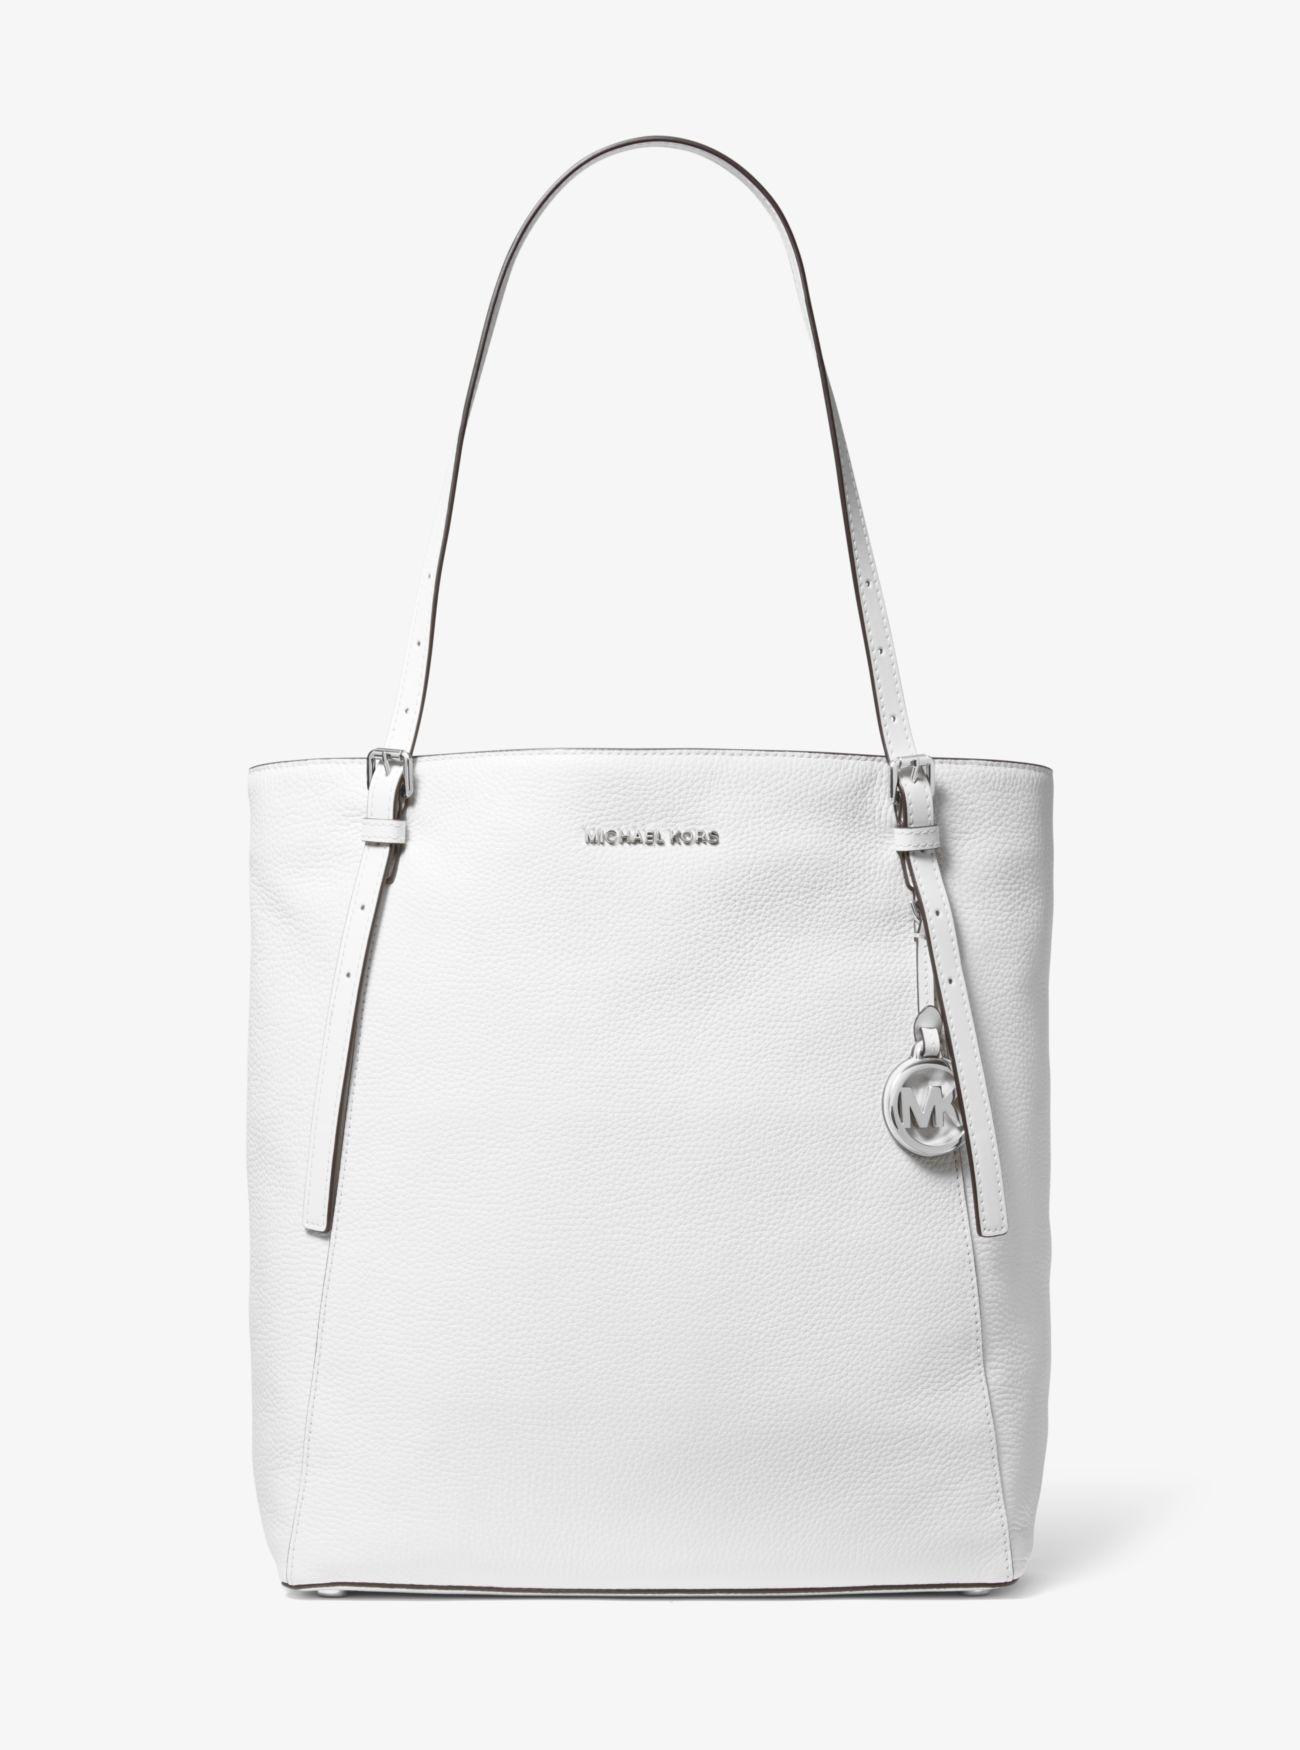 MICHAEL Michael Kors Megan Large Pebbled Leather Tote Bag in White | Lyst